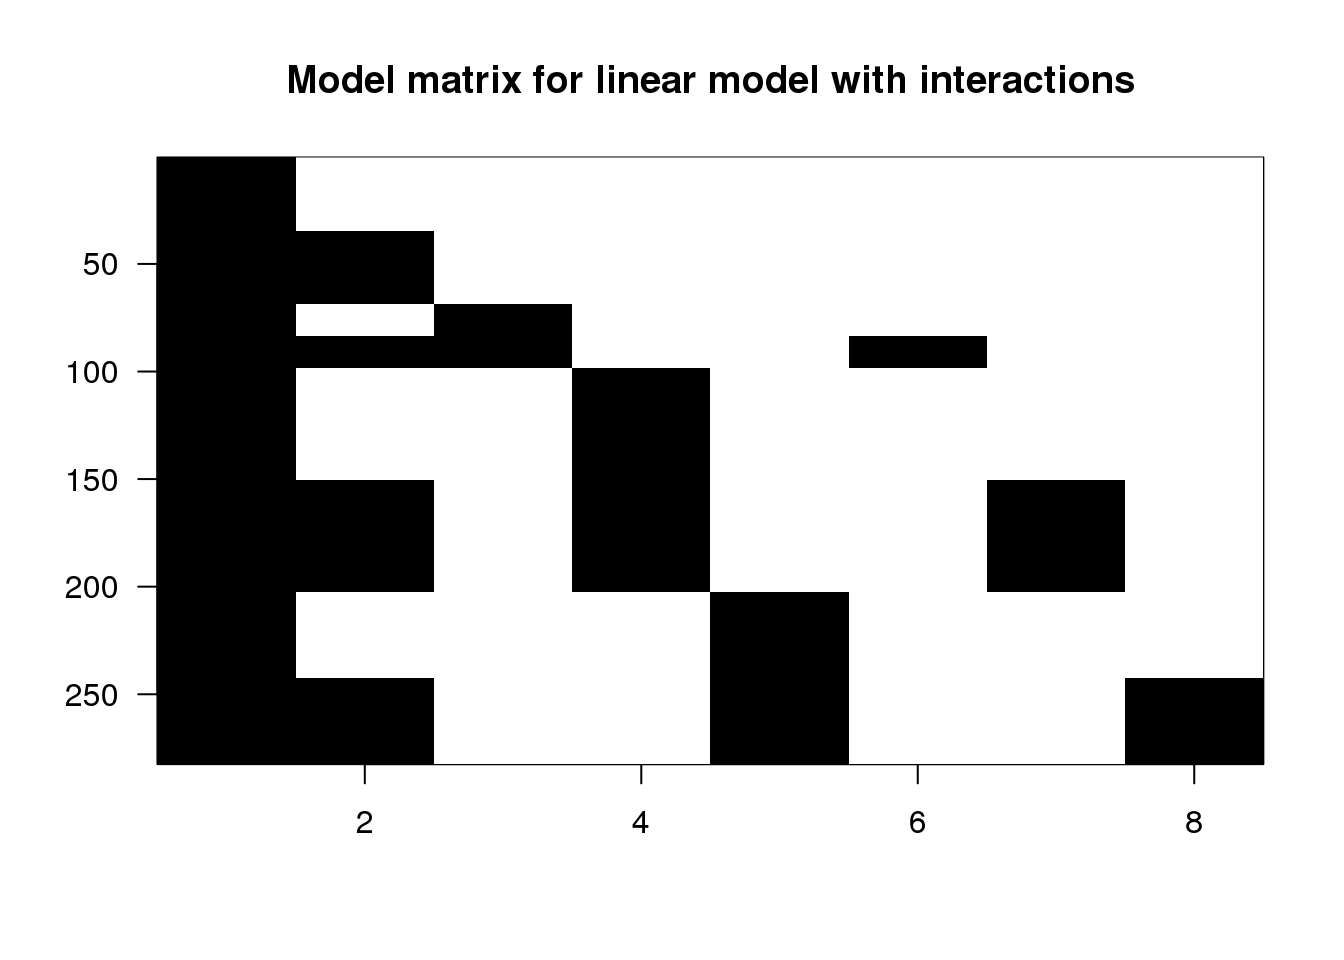 Image of model matrix with interactions.